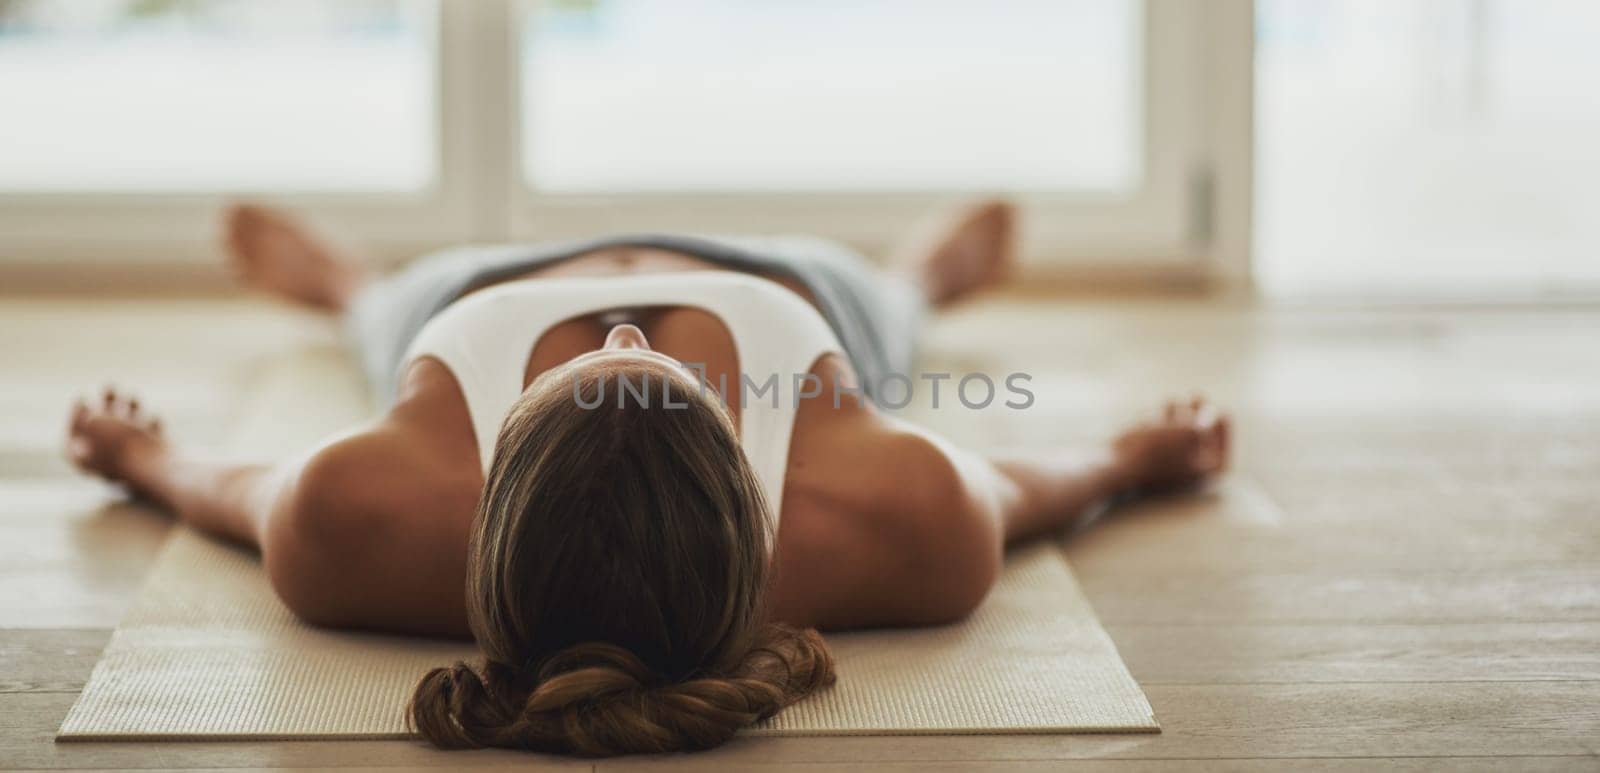 That workout really took it out of her. Shot of a young woman lying on her yoga mat after a workout. by YuriArcurs